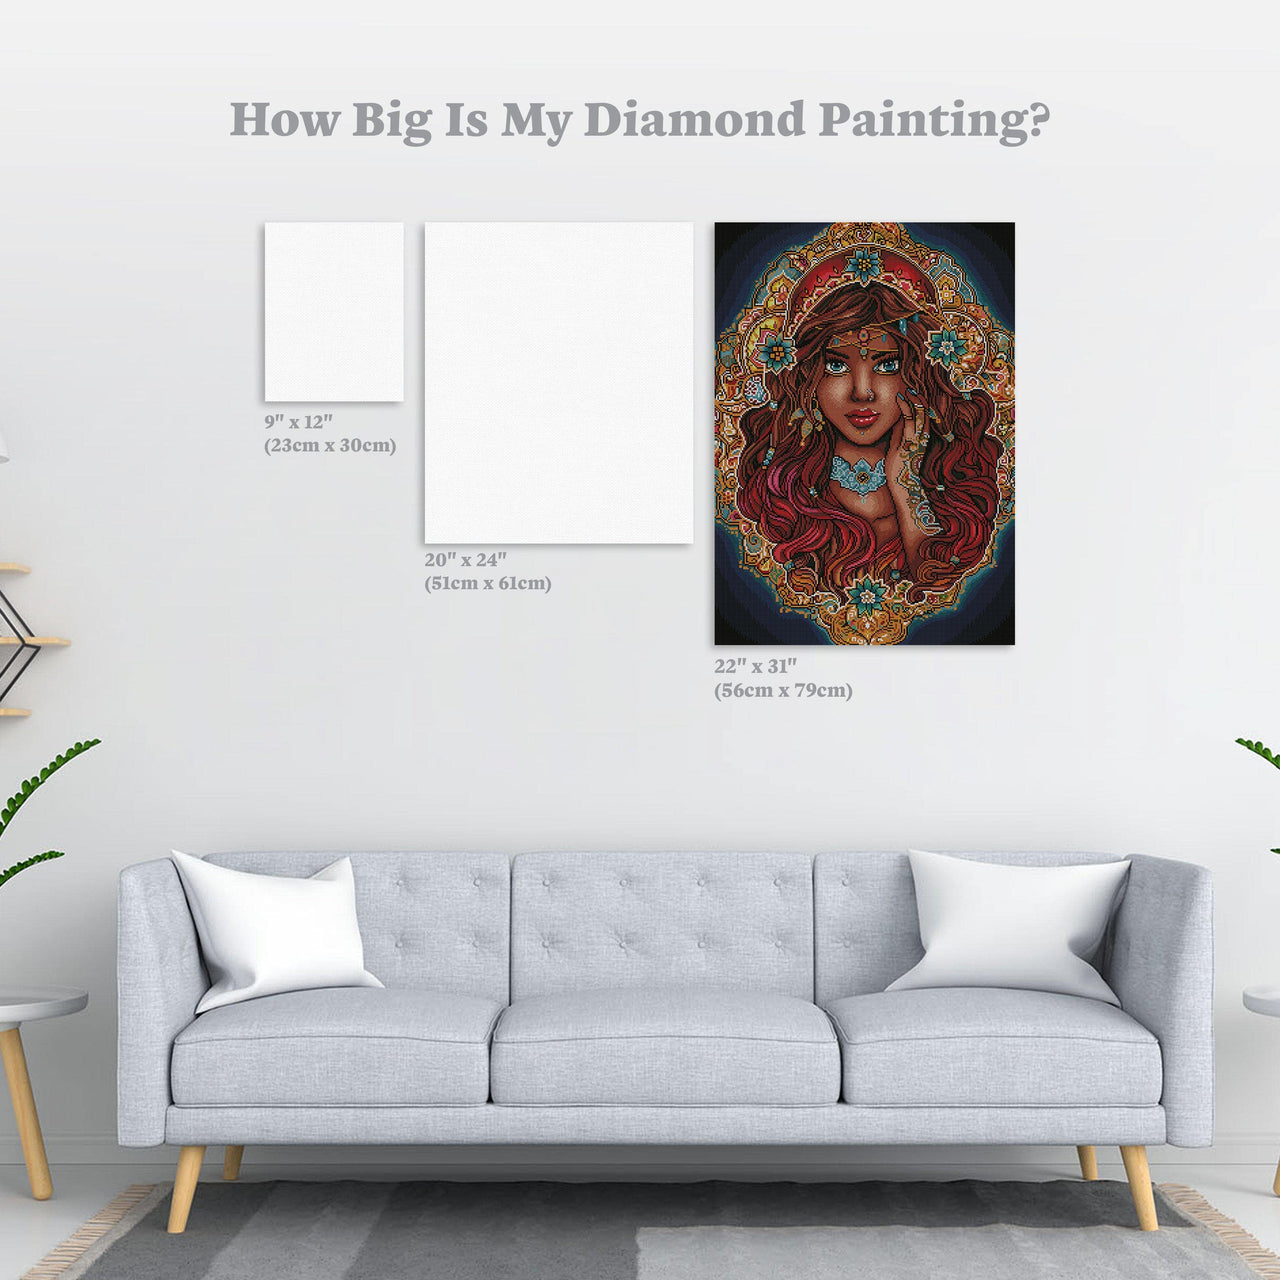 Diamond Painting The Seer 22" x 31″ (56cm x 79cm) / Square with 39 Colors including 2 ABs / 68,949